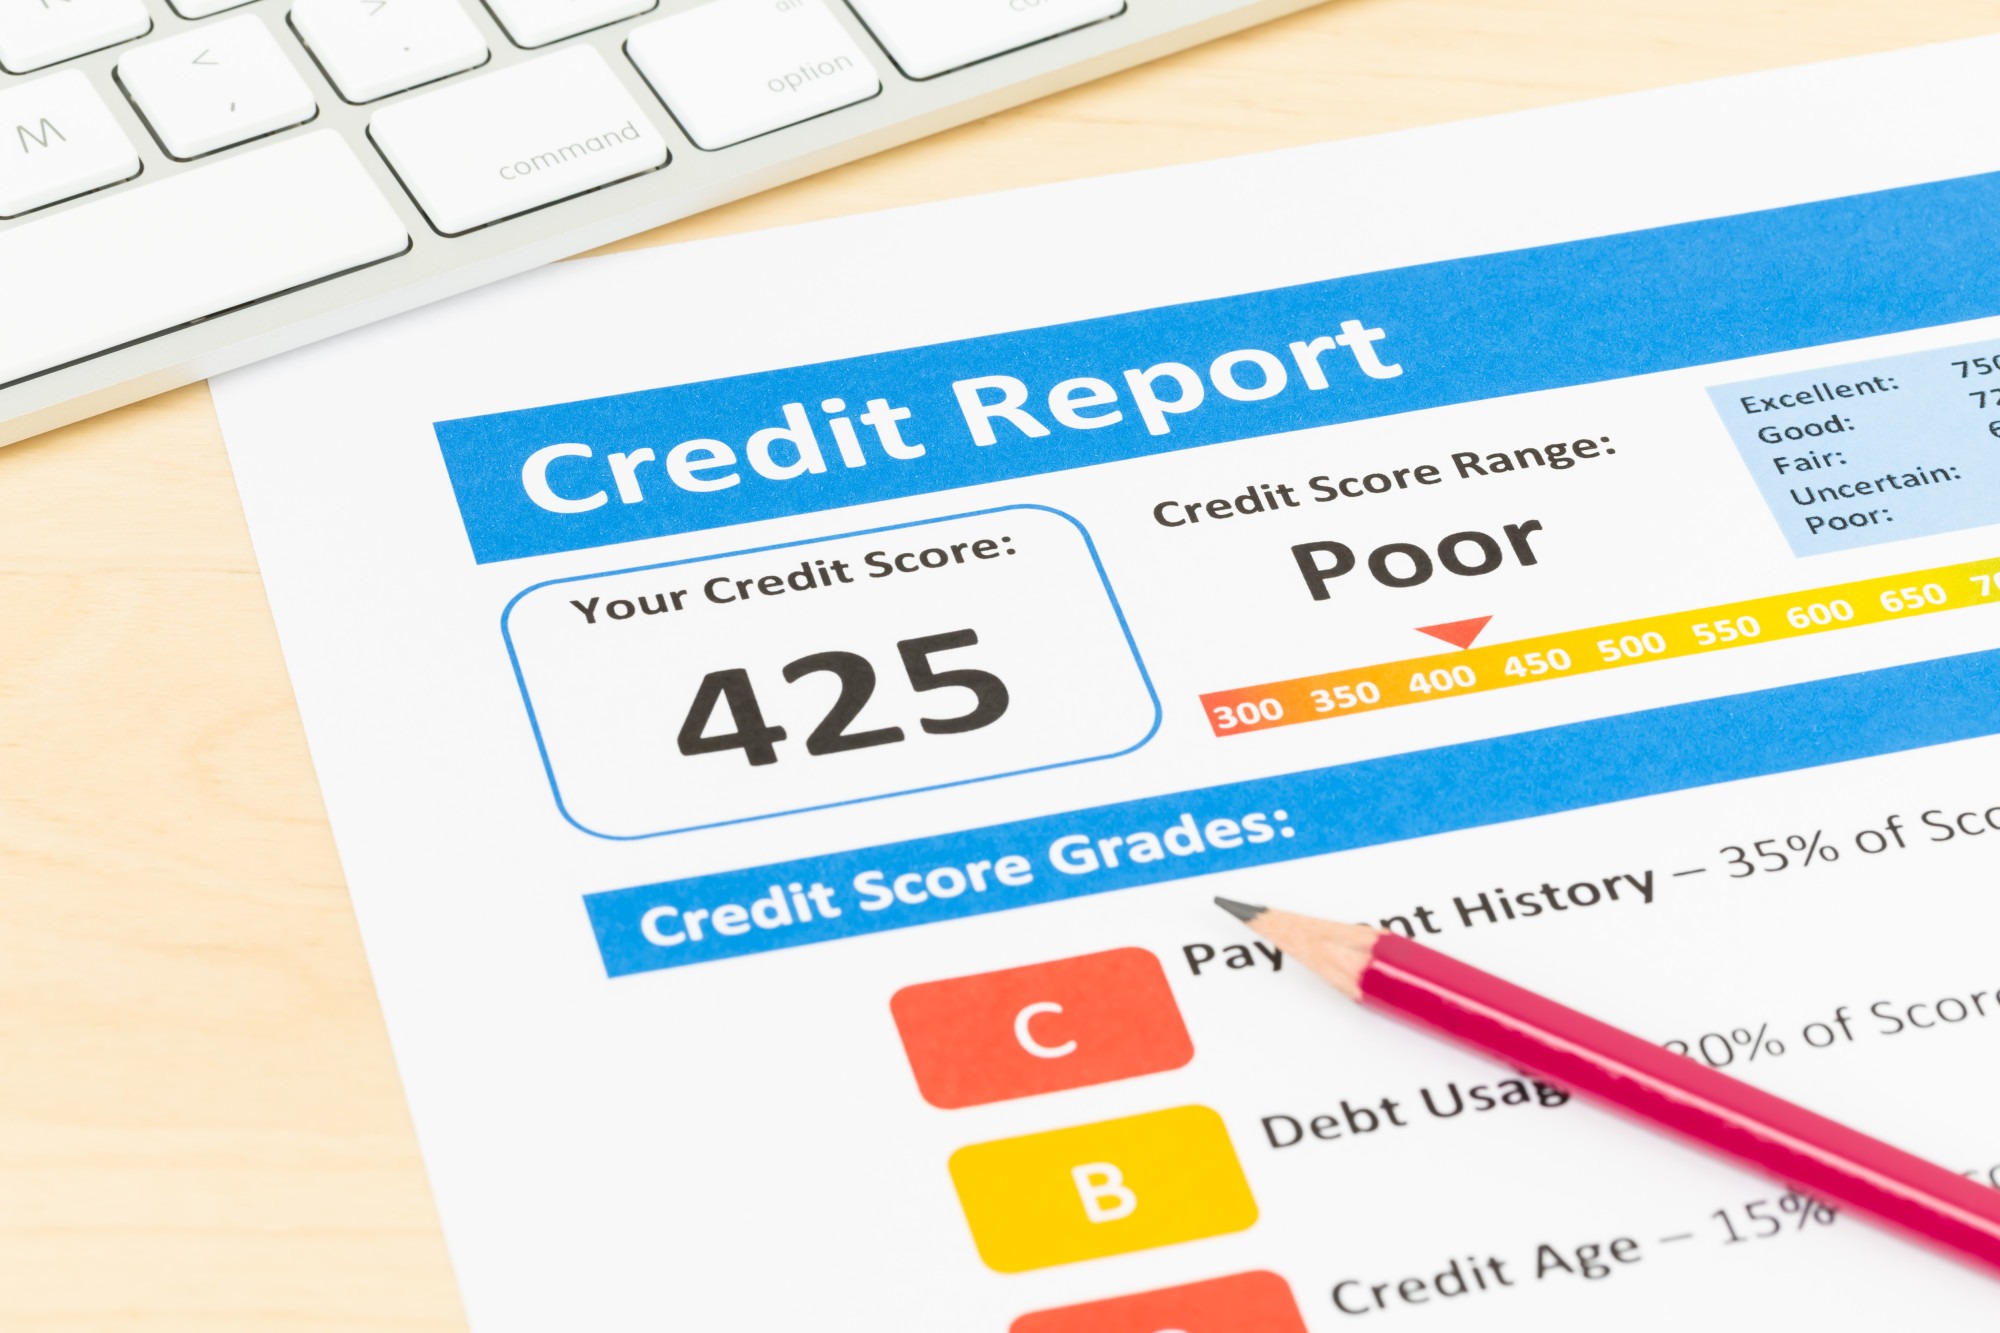 The Ultimate Guide on How to Read a Credit Report